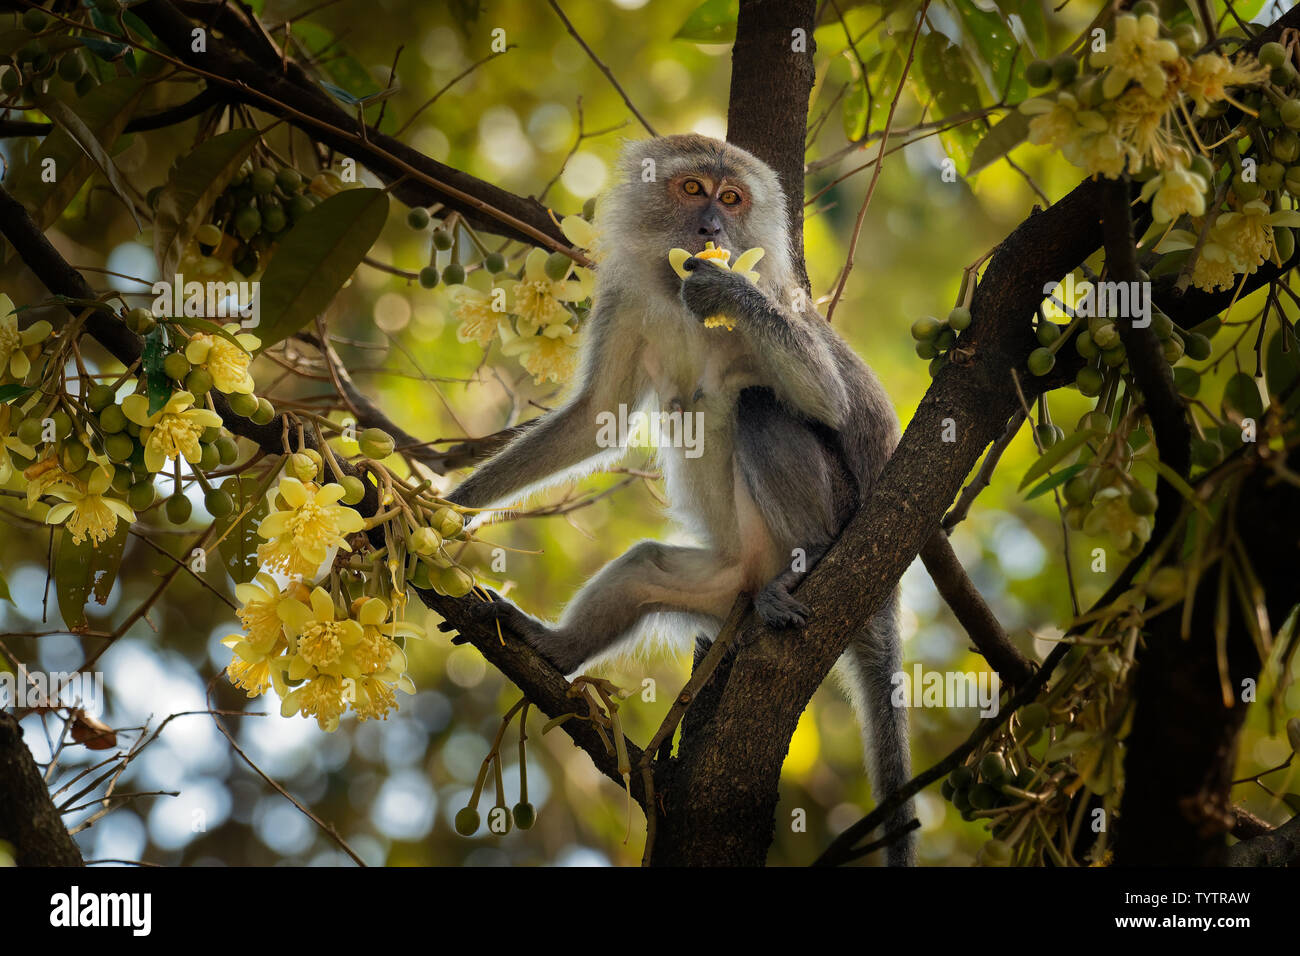 Long-tailed Macaque - Macaca fascicularis also known as crab-eating macaque, a cercopithecine primate native to Southeast Asia, is referred to as the Stock Photo